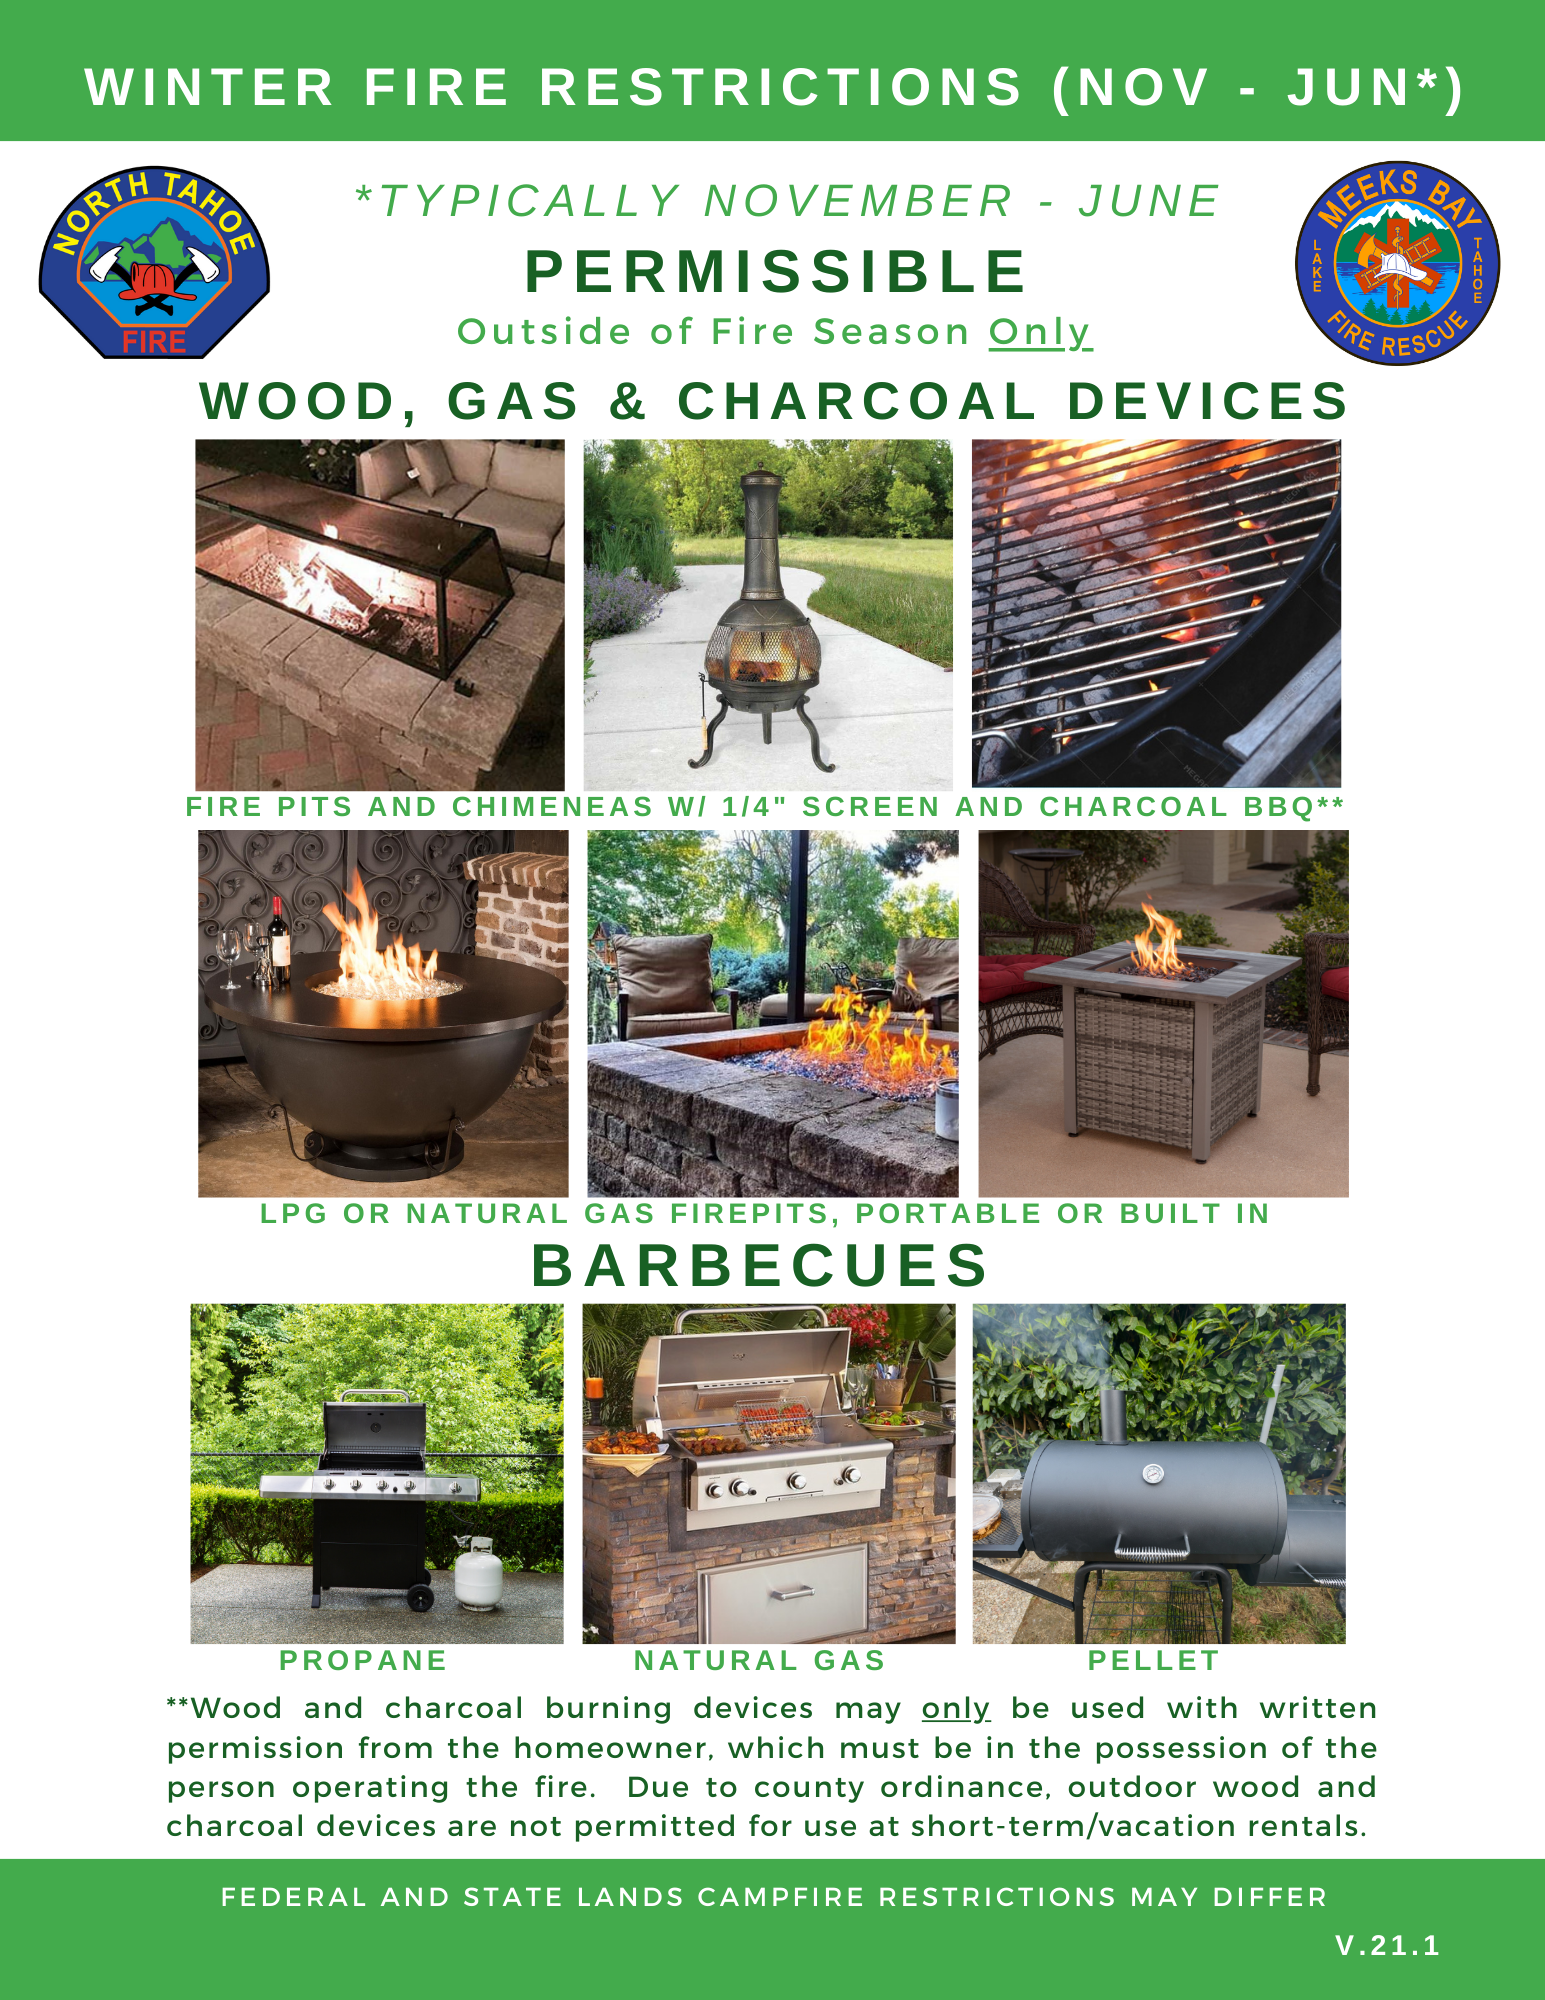 An image of the outdoor wood, gas and charcoal devices and barbcues that are permitted for use during the winter months in Lake Tahoe.